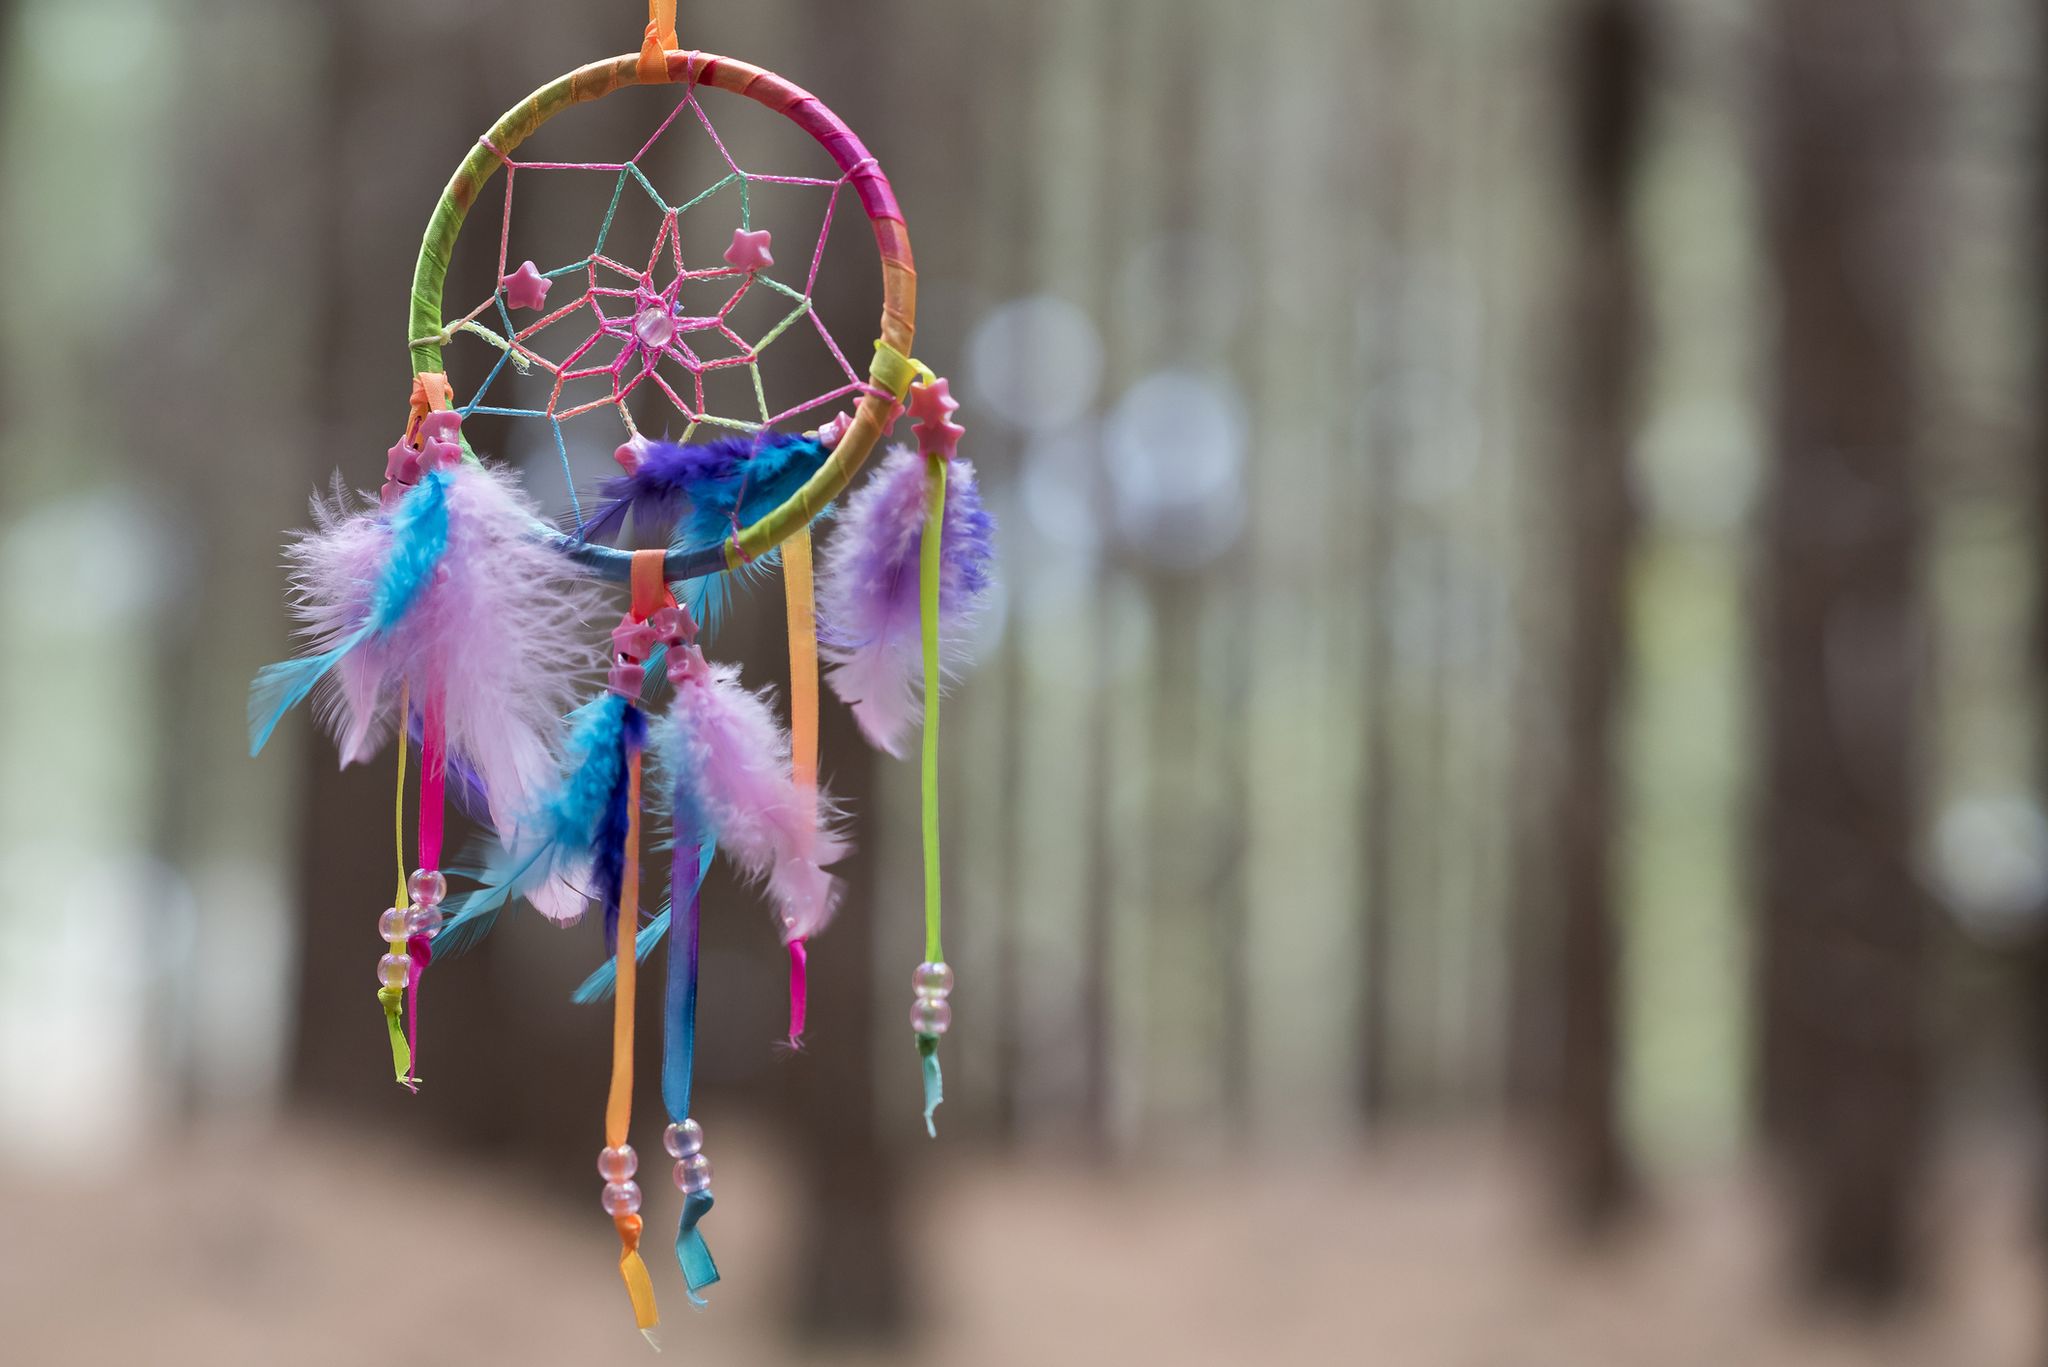 https://hips.hearstapps.com/hmg-prod/images/multi-colored-dreamcatcher-hanging-in-the-woods-royalty-free-image-605382175-1563459744.jpg?resize=2048:*